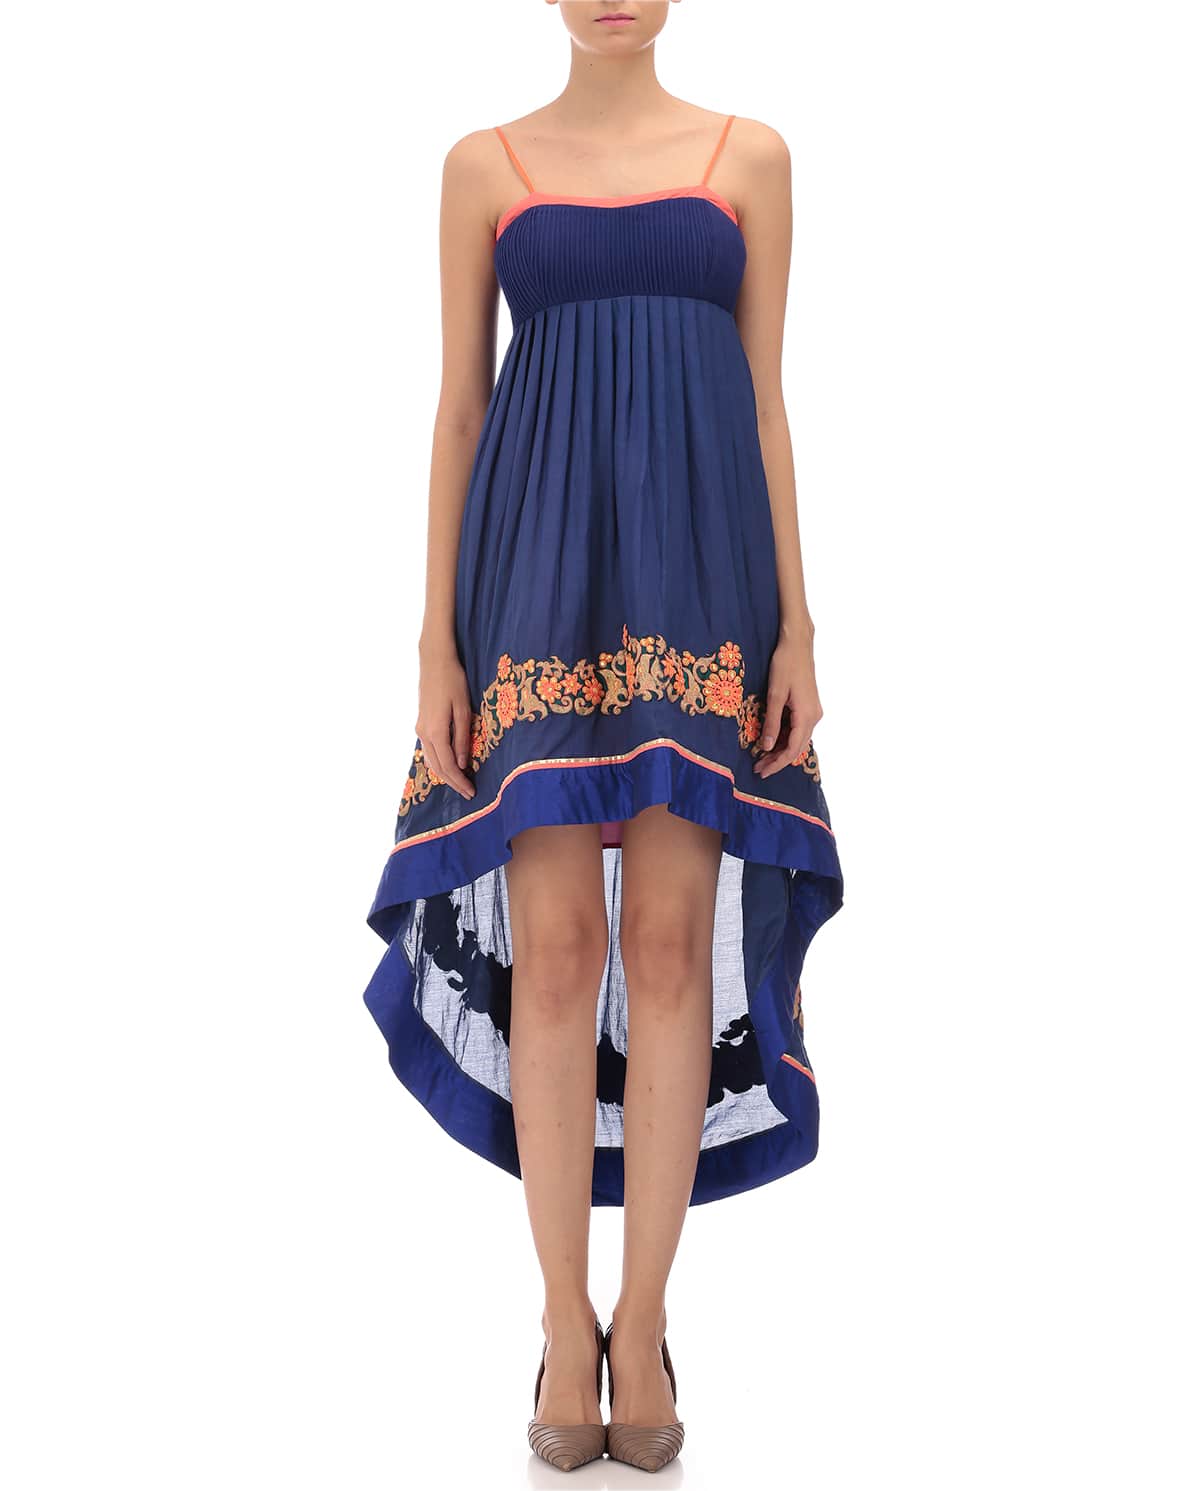 blue assymetrical dress with embroidery.